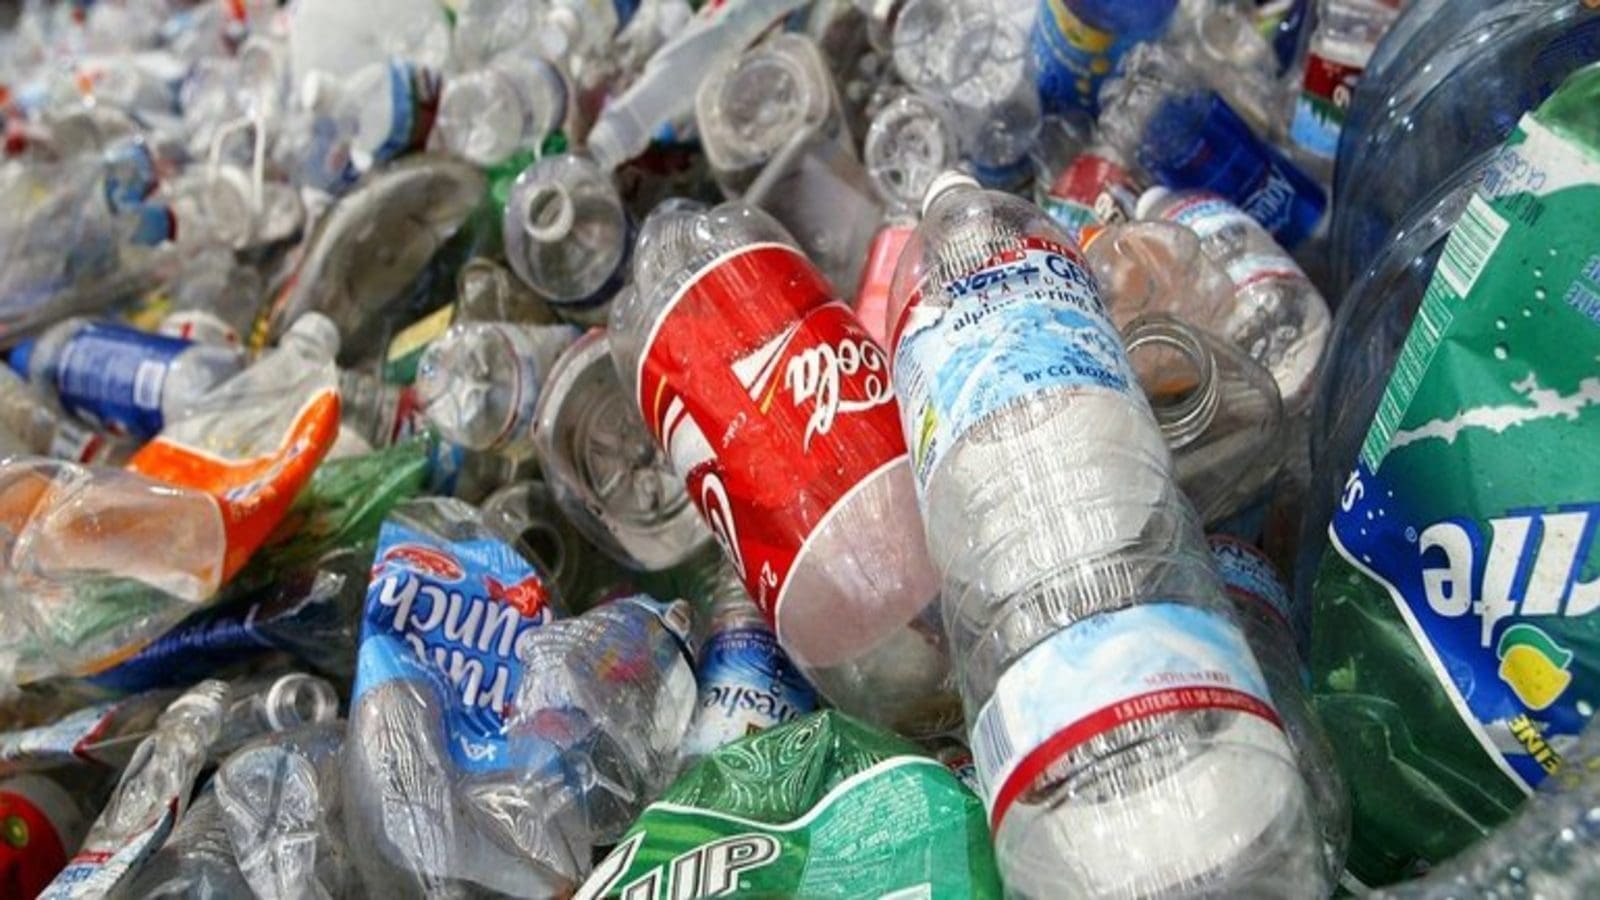 Coca-Cola scores highest on sustainable packaging in 2021 Corporate Plastic Pollution Scorecard